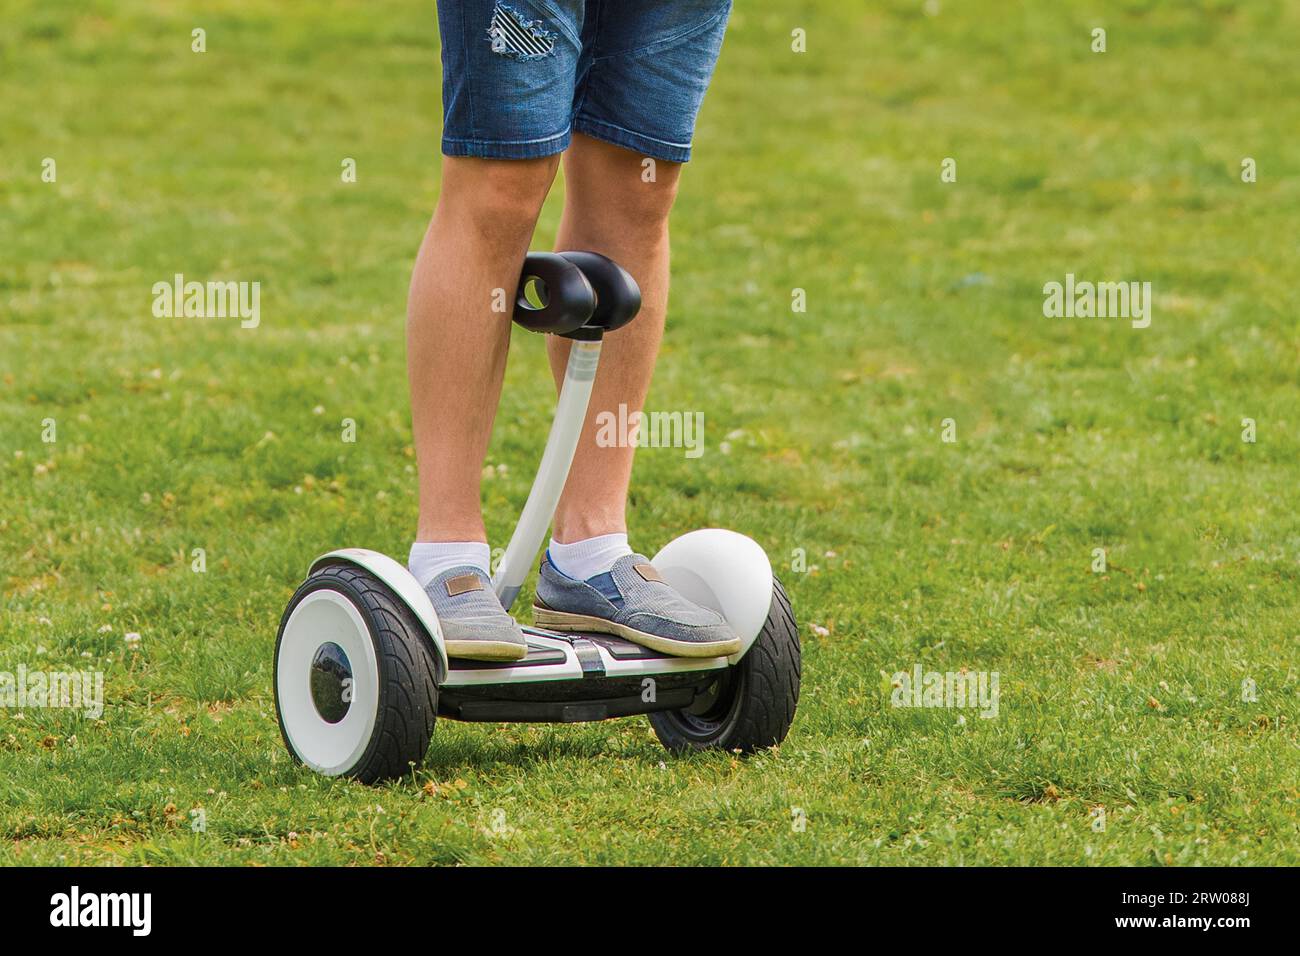 The legs of an adult man stand on a hoverboard against the background of grass in the park. Stock Photo